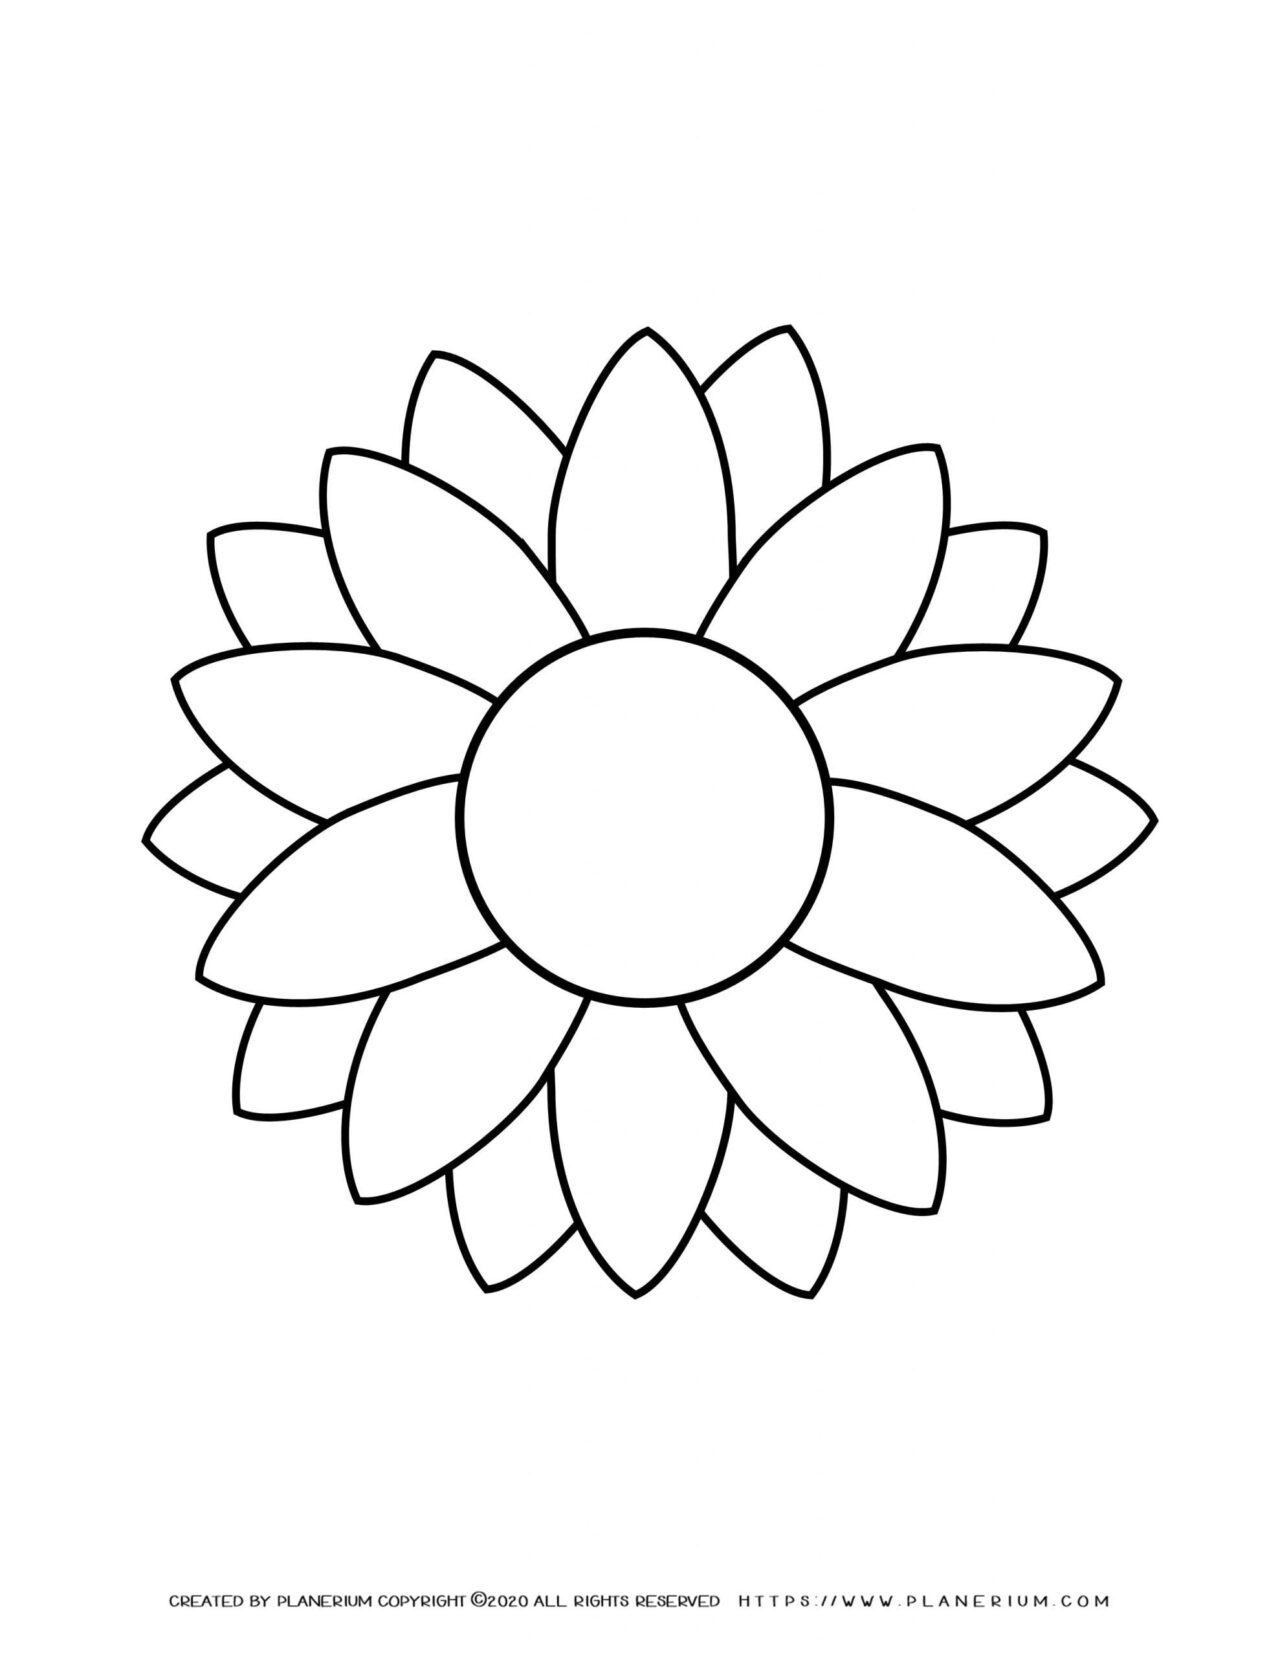 Summer - Coloring Page - Sunflower